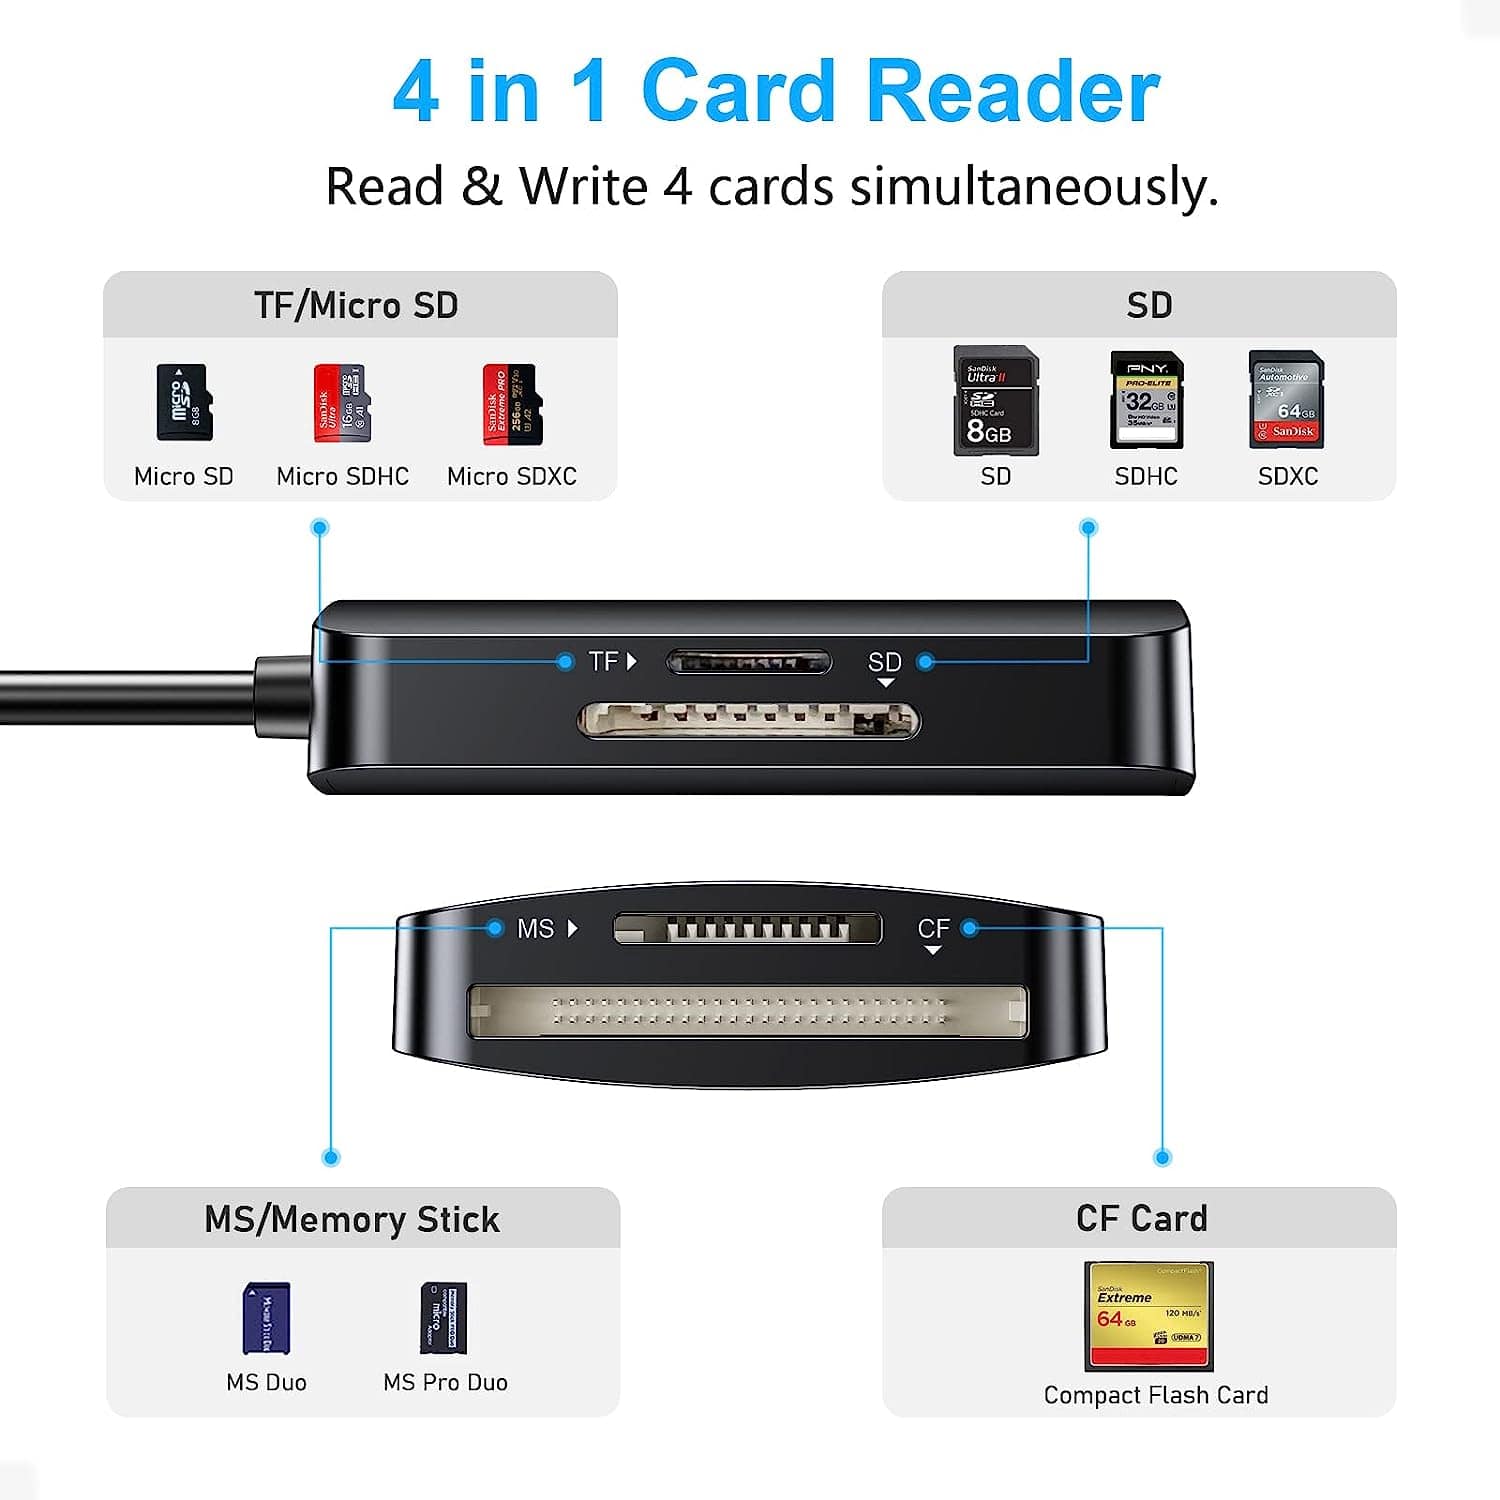 Beikell Card Reader 4 in 1 Dual Connector USB C &amp; USB 3.0 , 4 Cards Simultaneously Memory Card Adapter for SD/SDHC/SDXC/Micro SD/Micro SDXC/MS Duo, Compatible with Windows, OS